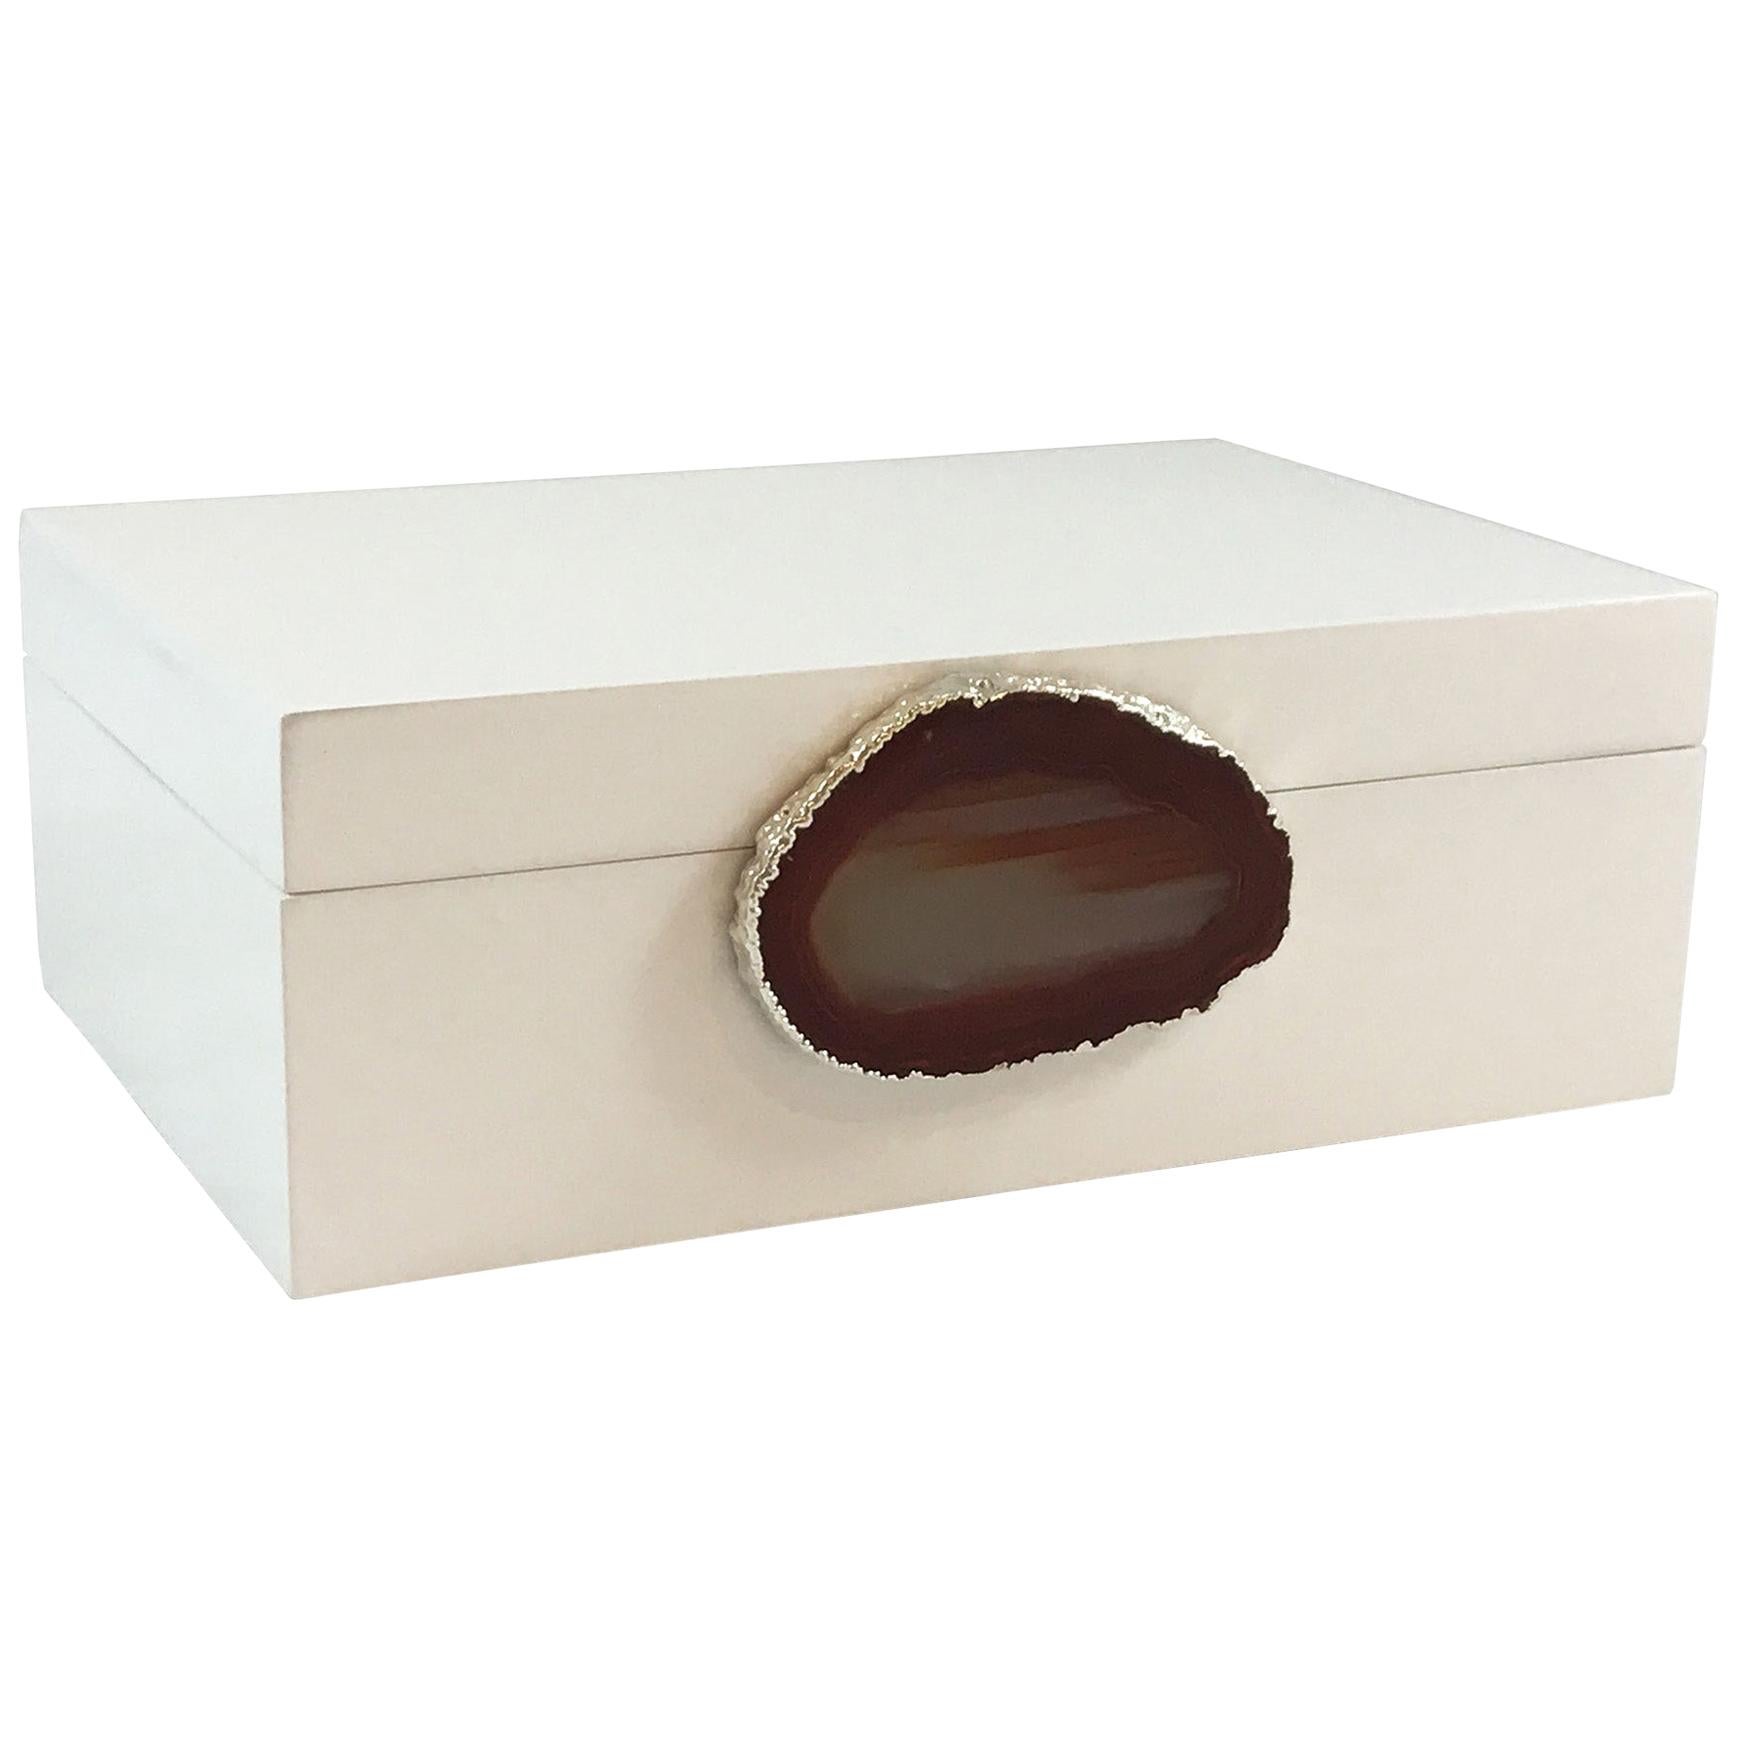 Emiliano Large Agate Box in White and Natural Stone by CuratedKravet